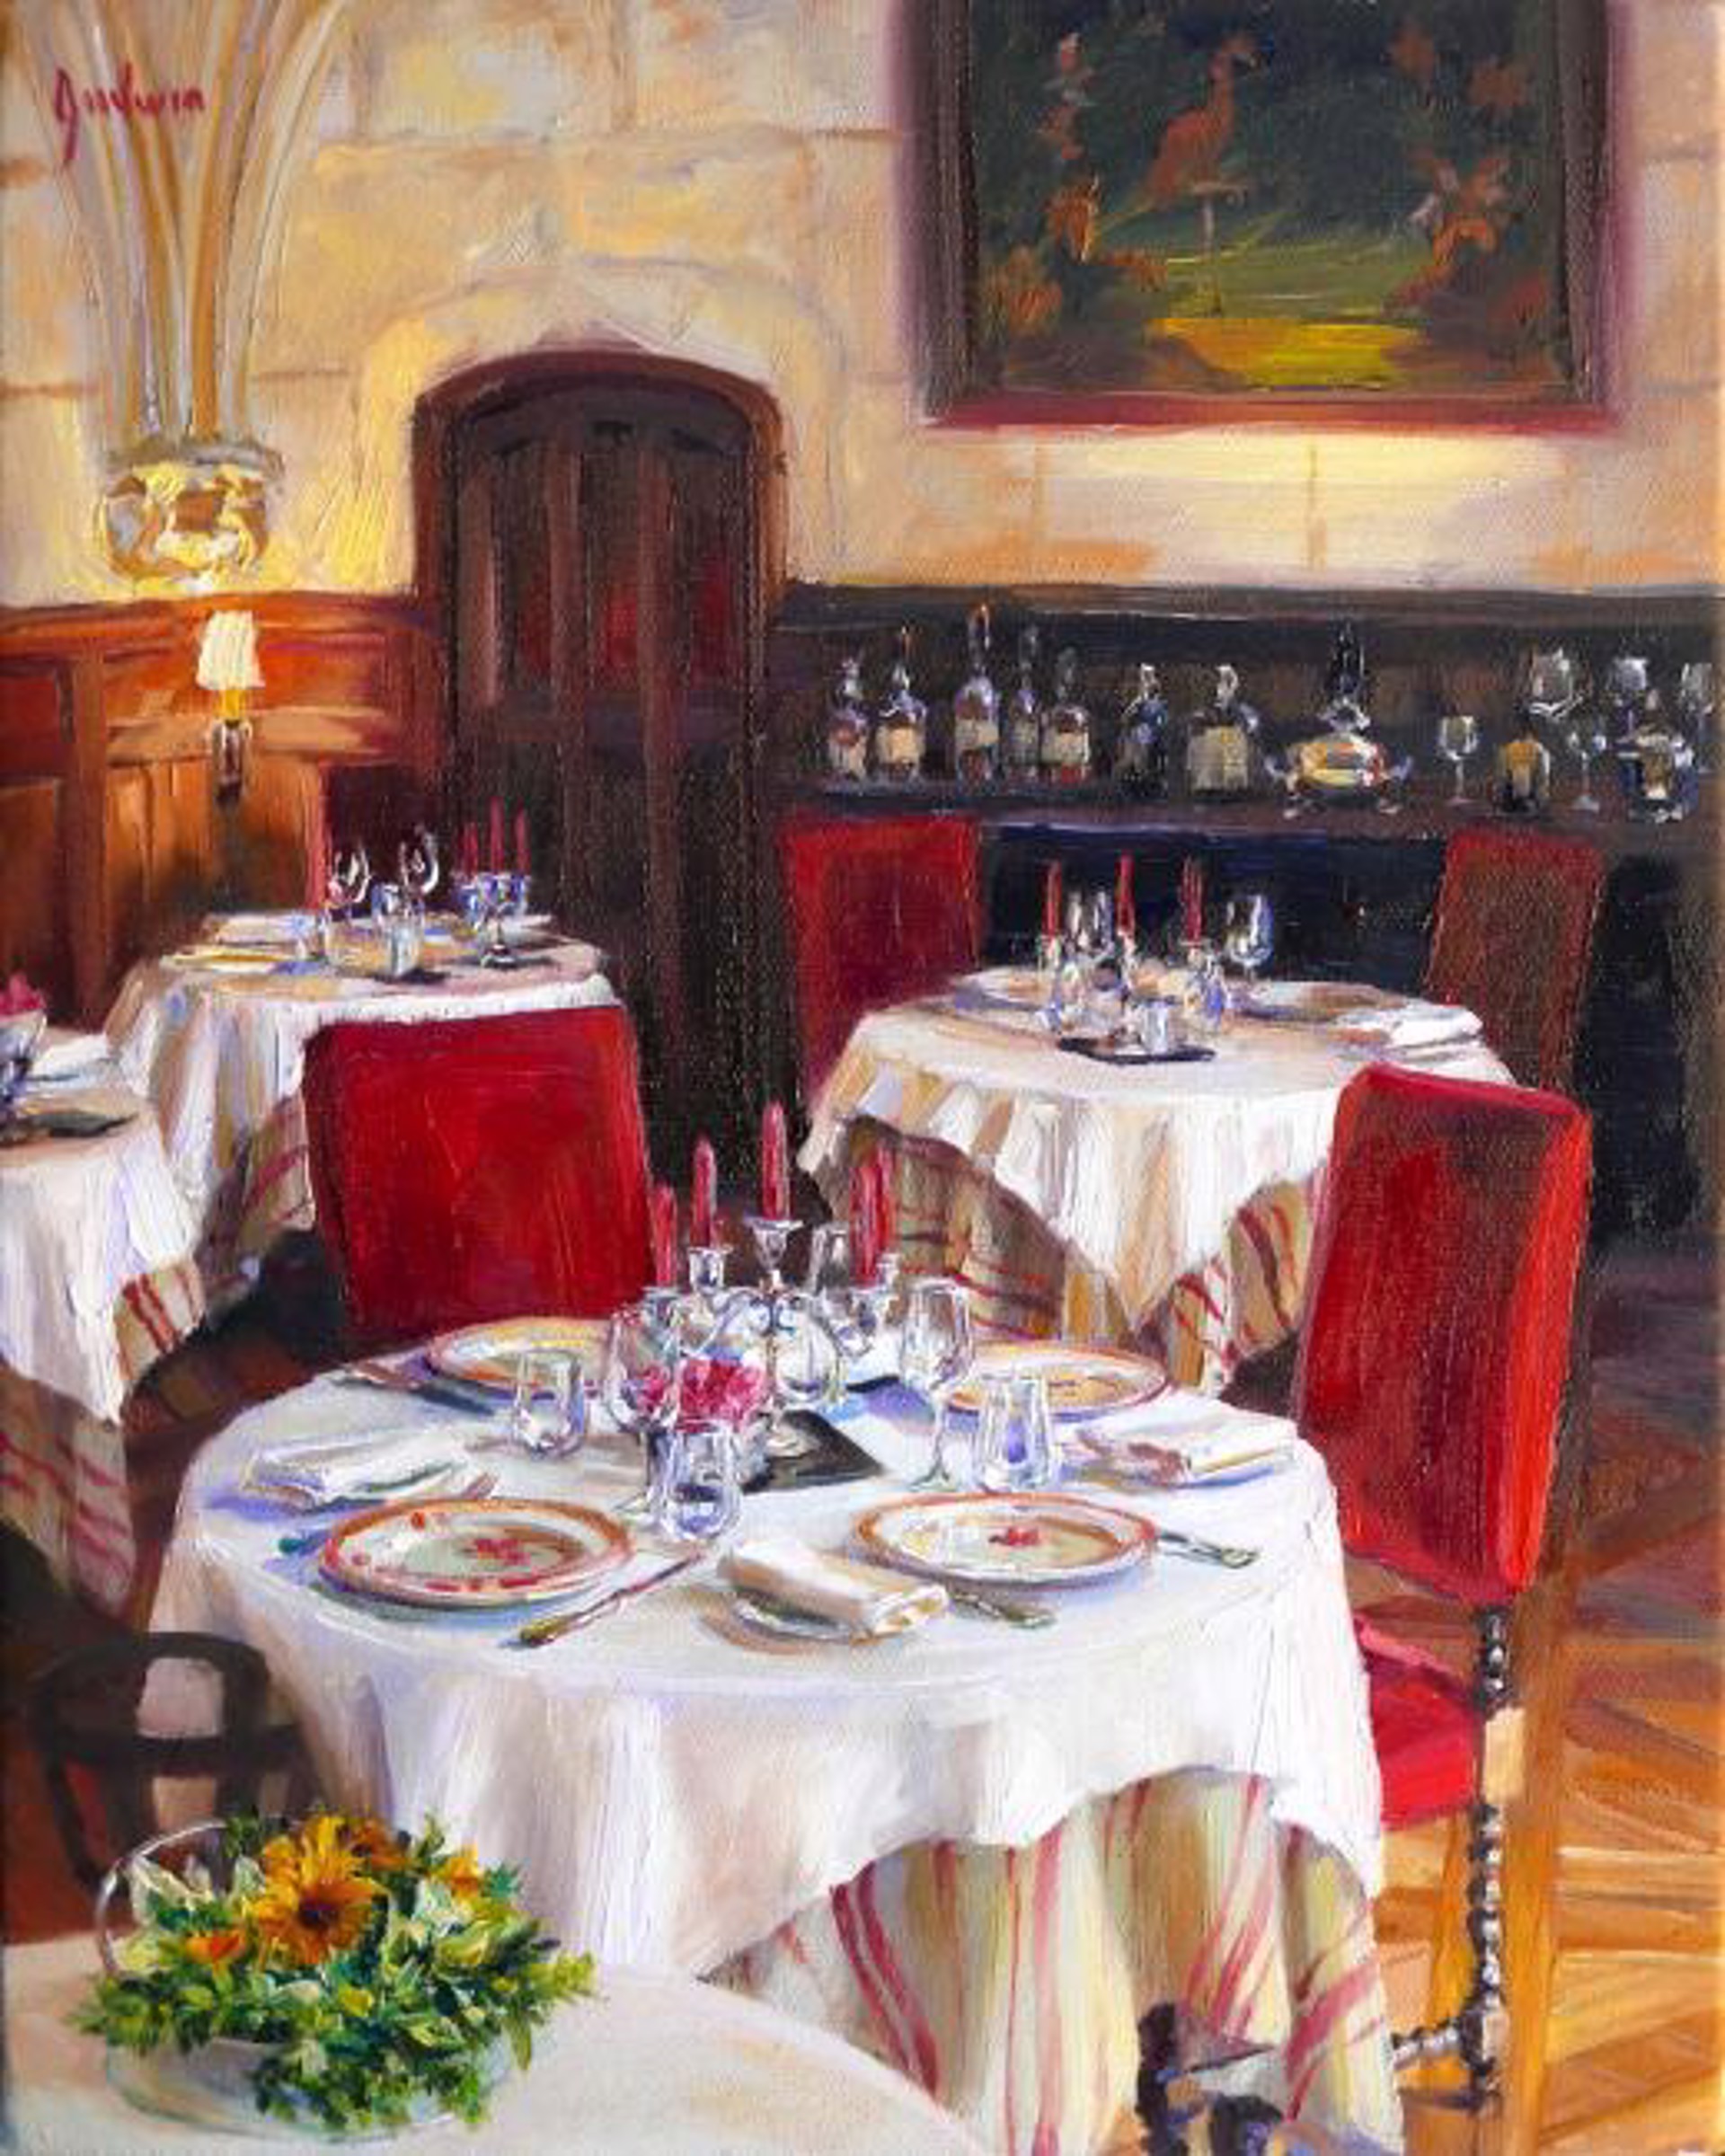 Striped Linens and Glassware, Chateau de Chissay by Lindsay Goodwin